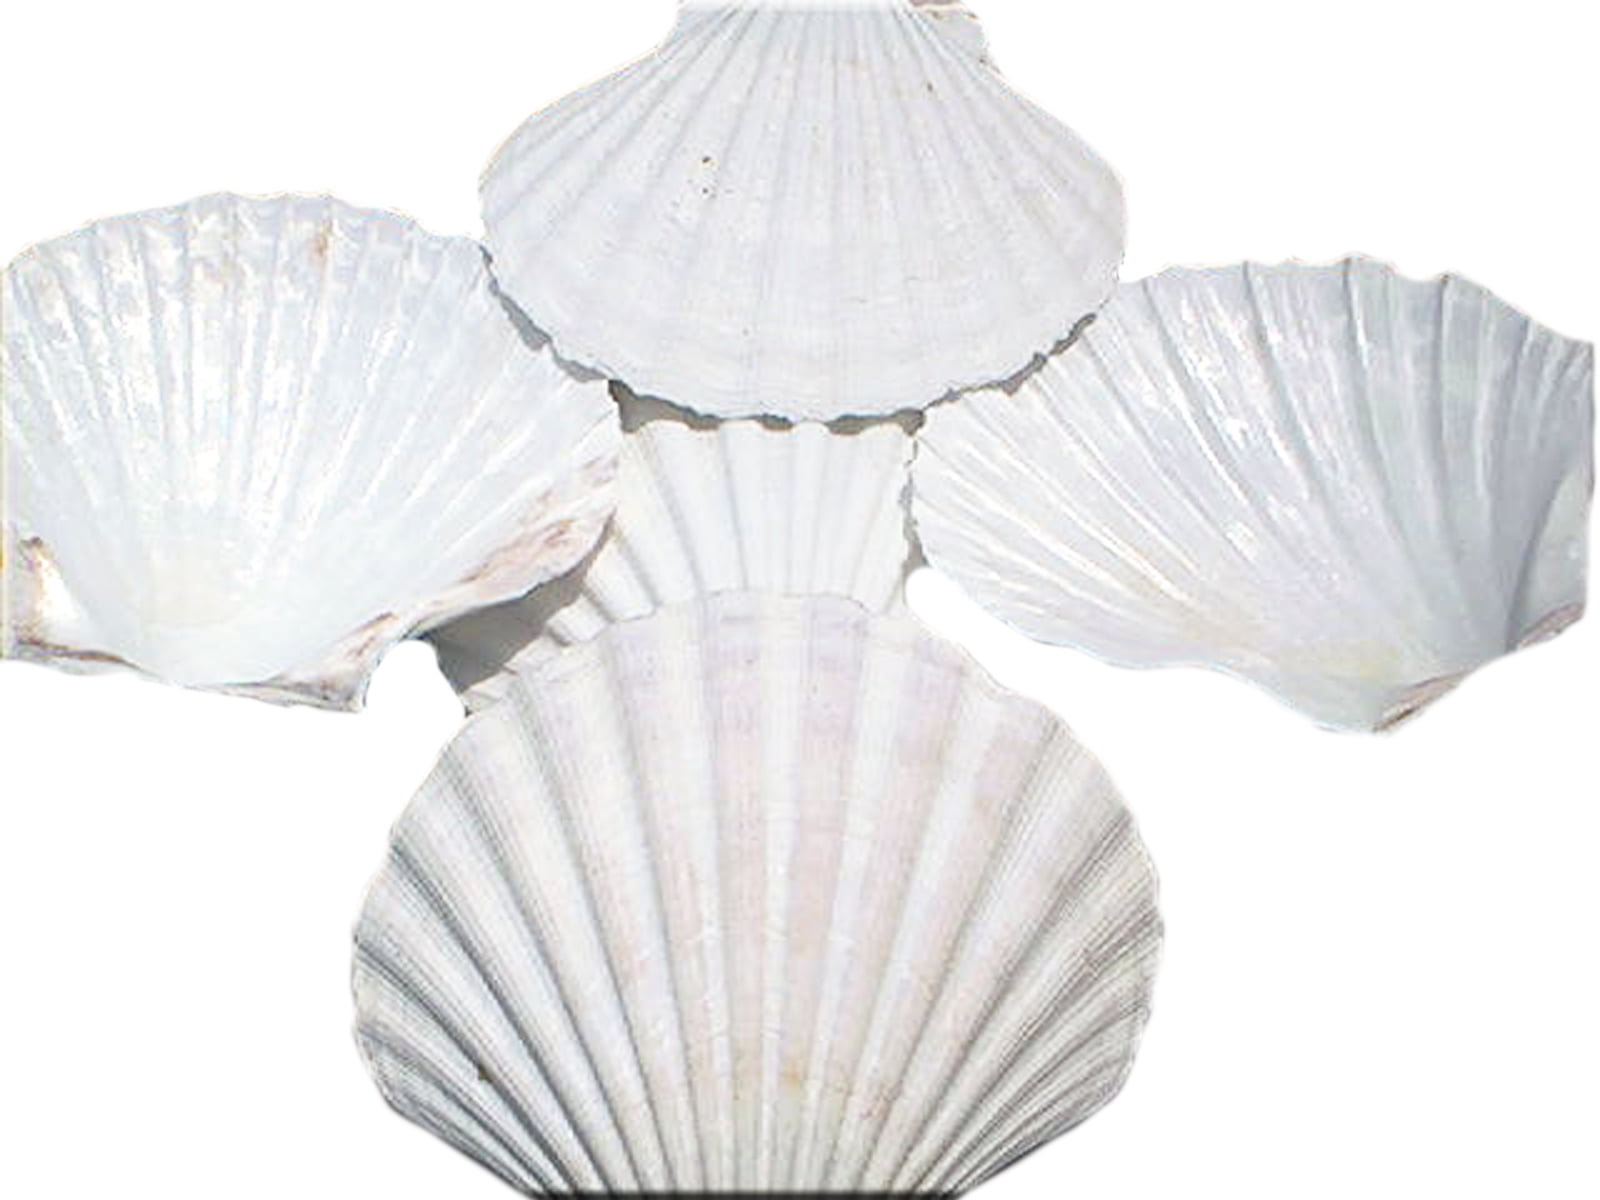 Set of 12 Large Real Baking Scallop Shells (4 - 4 3/8) for